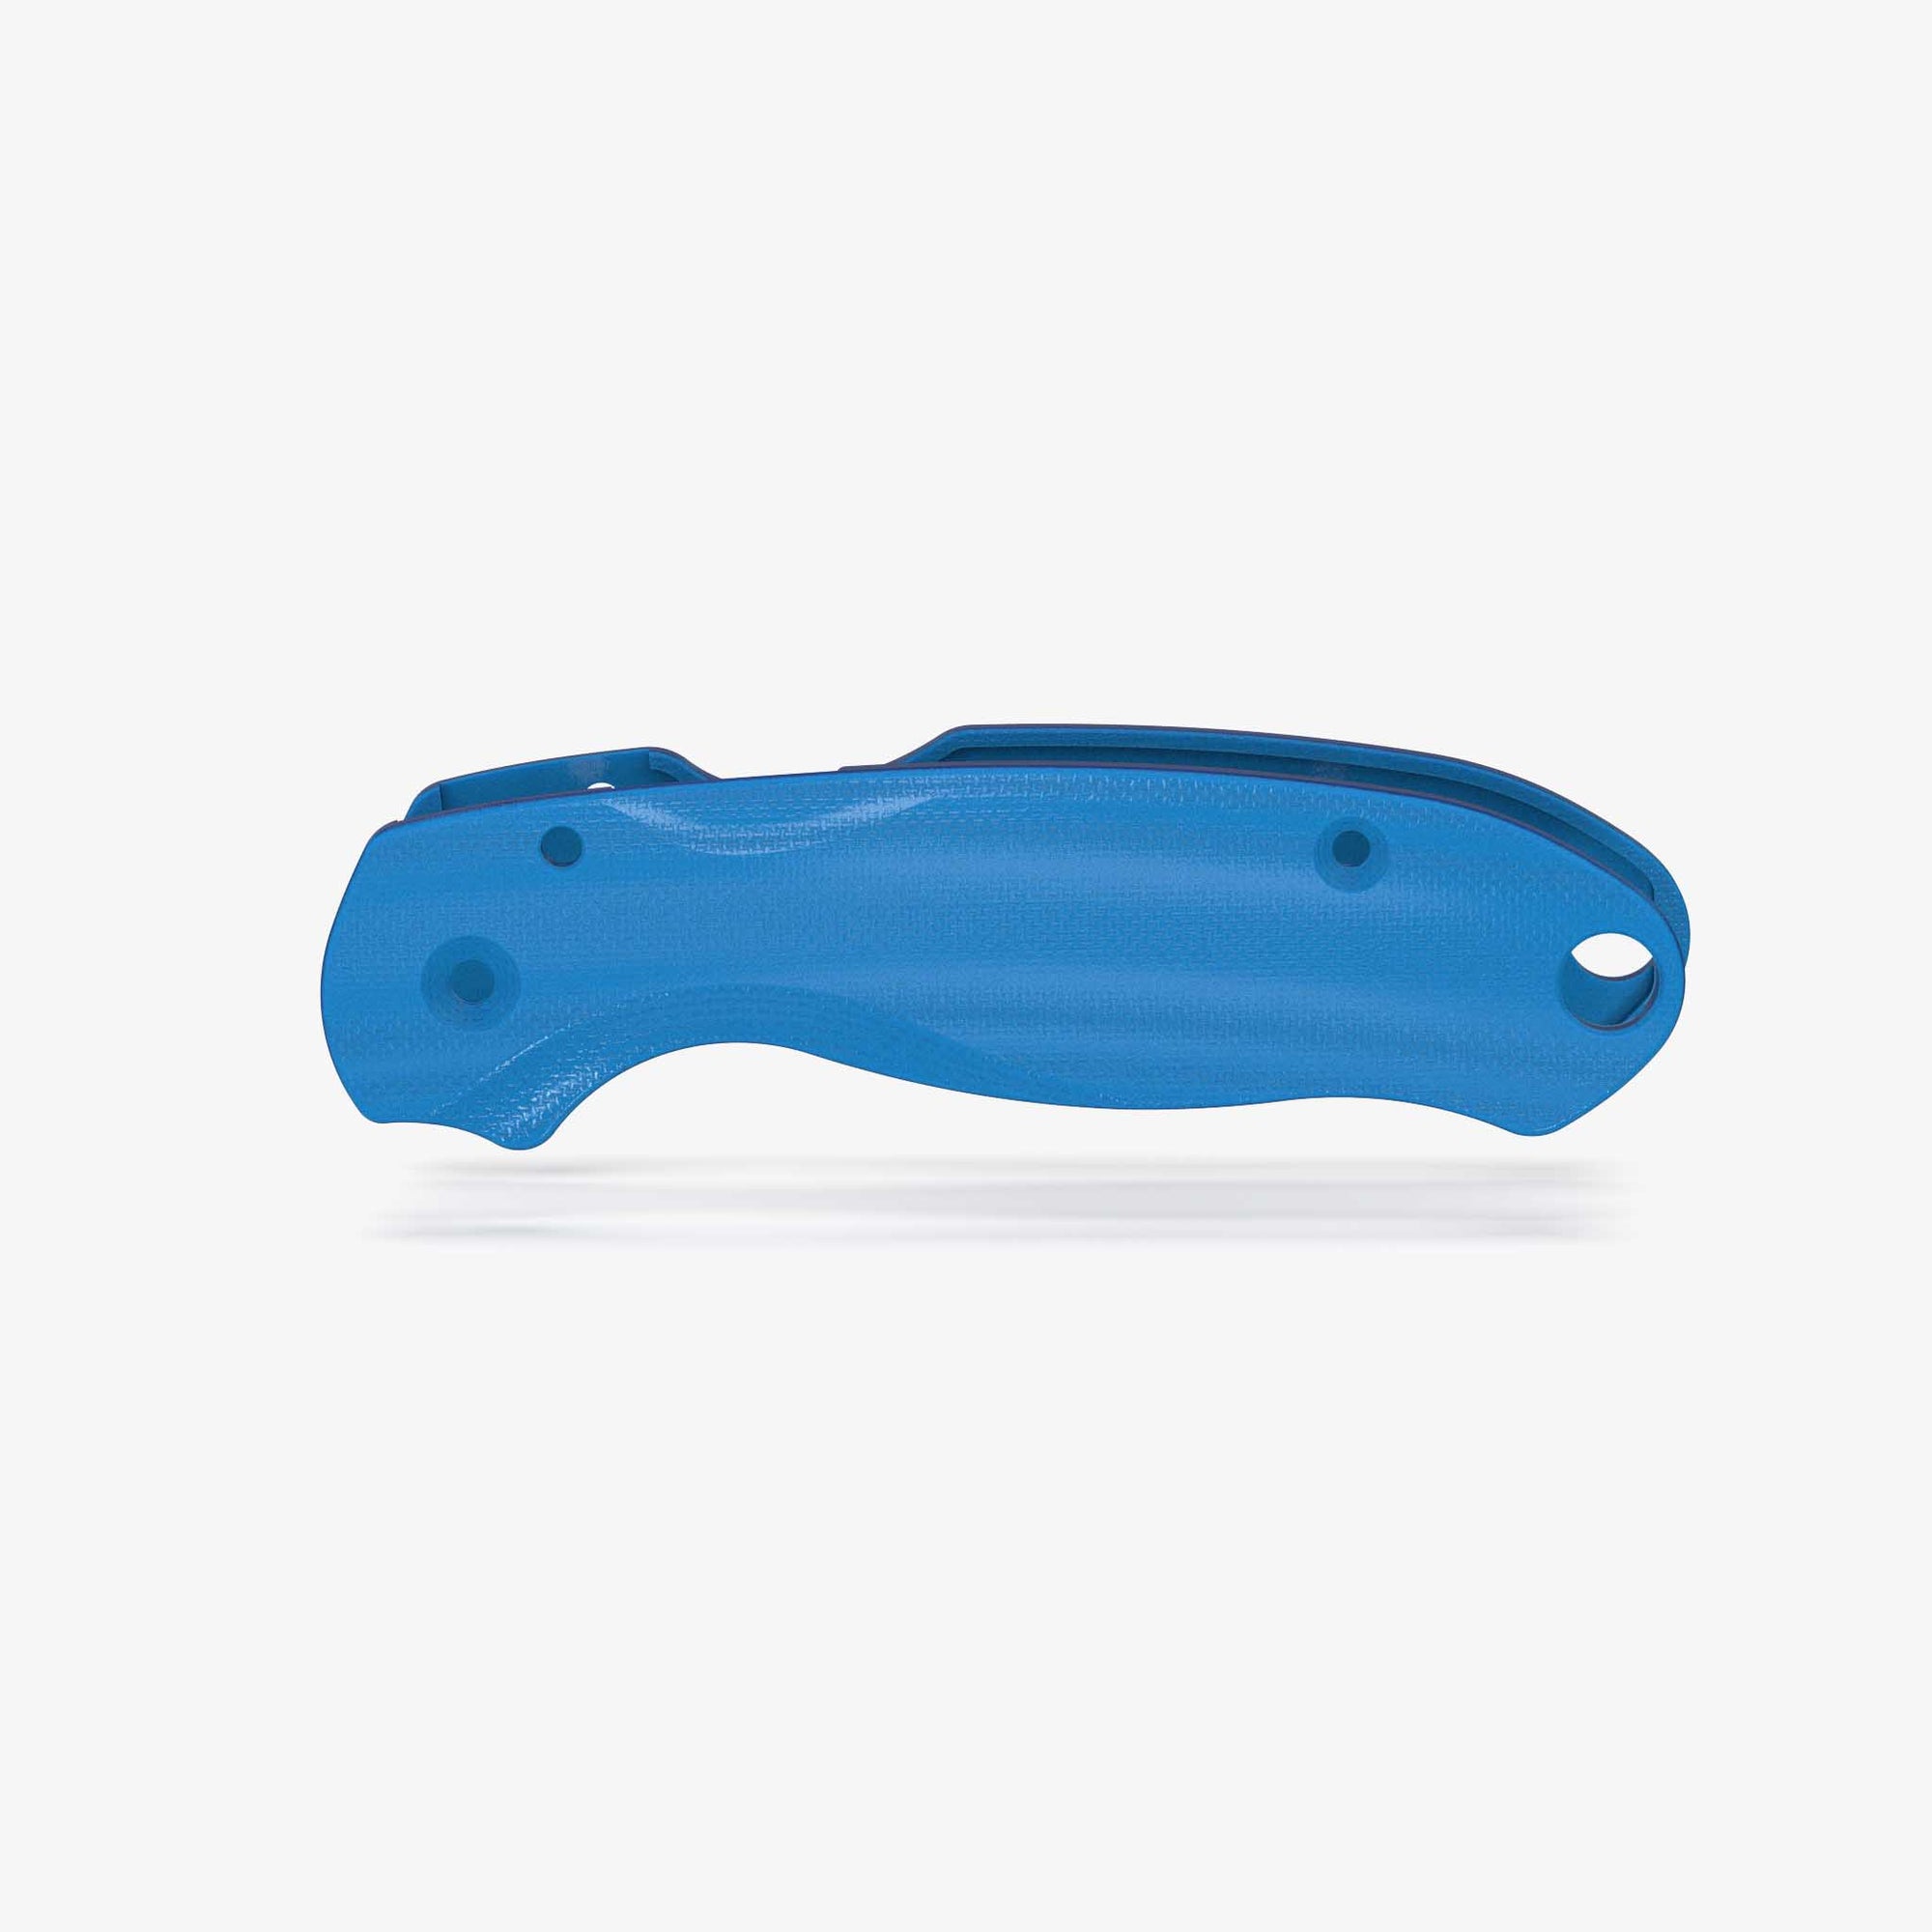 Lotus G-10 Scales for Spyderco Para 3 Knife-Blue Lapis